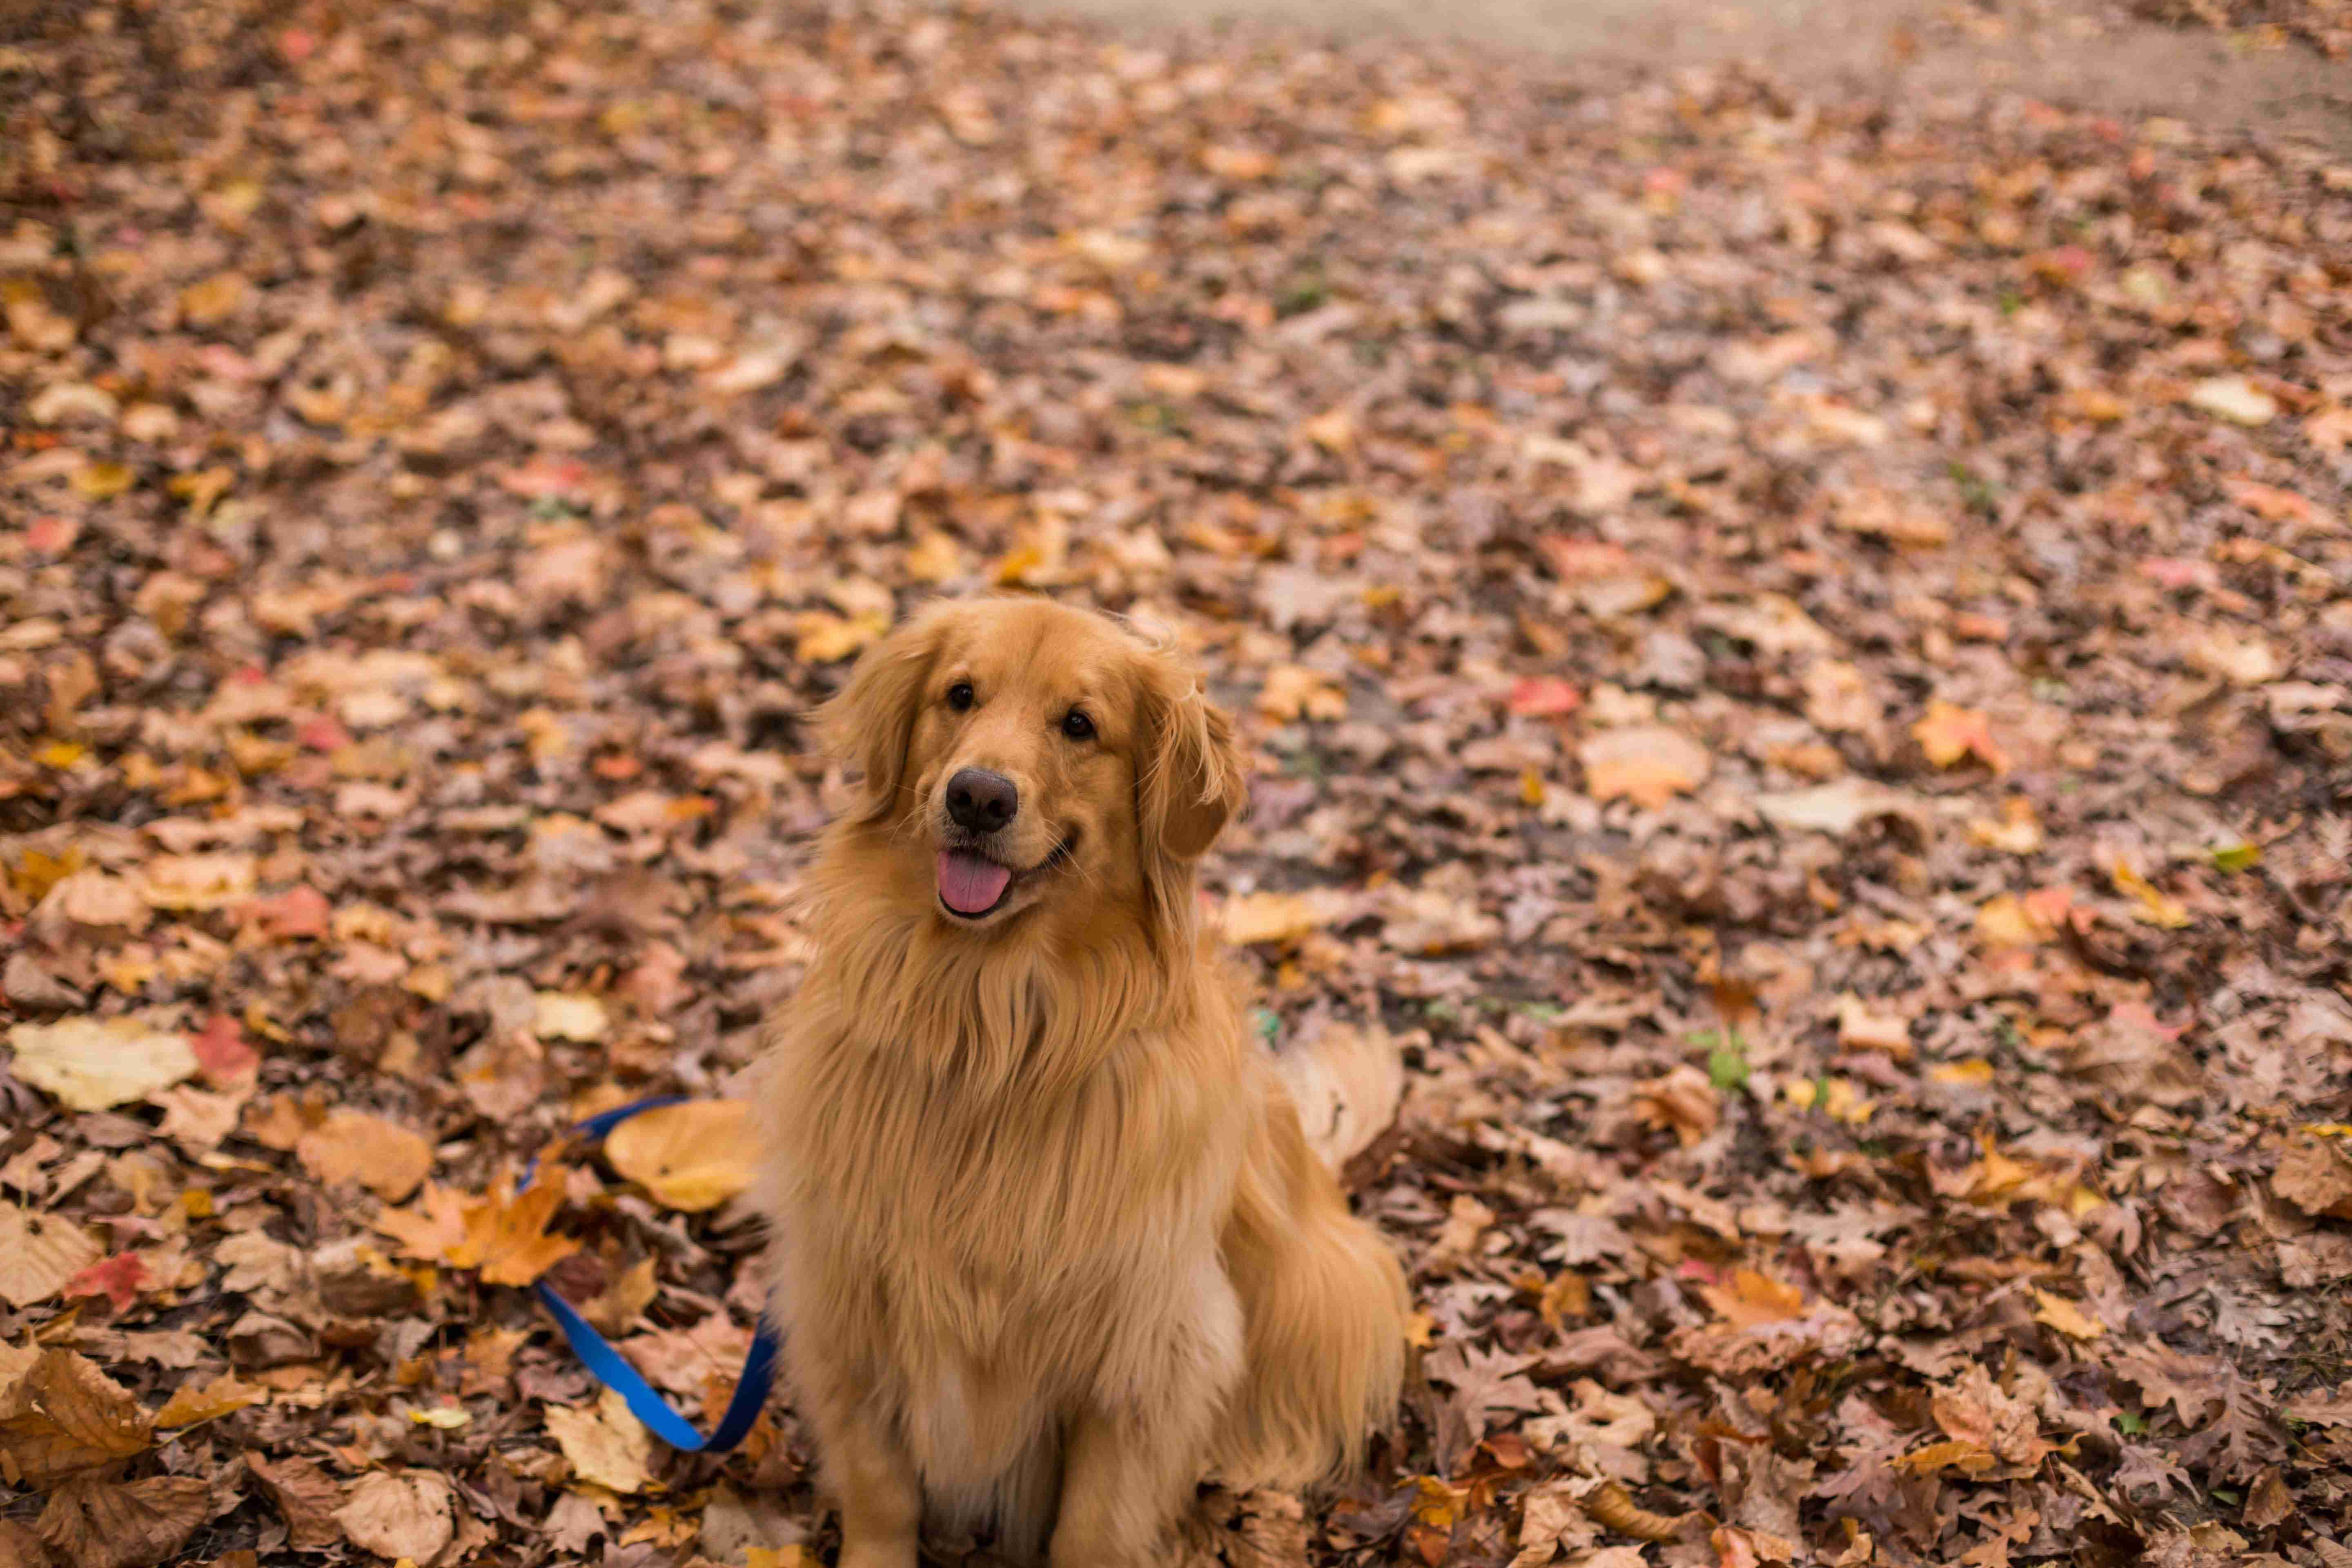 Can Golden Retrievers be prone to certain types of gastrointestinal issues?